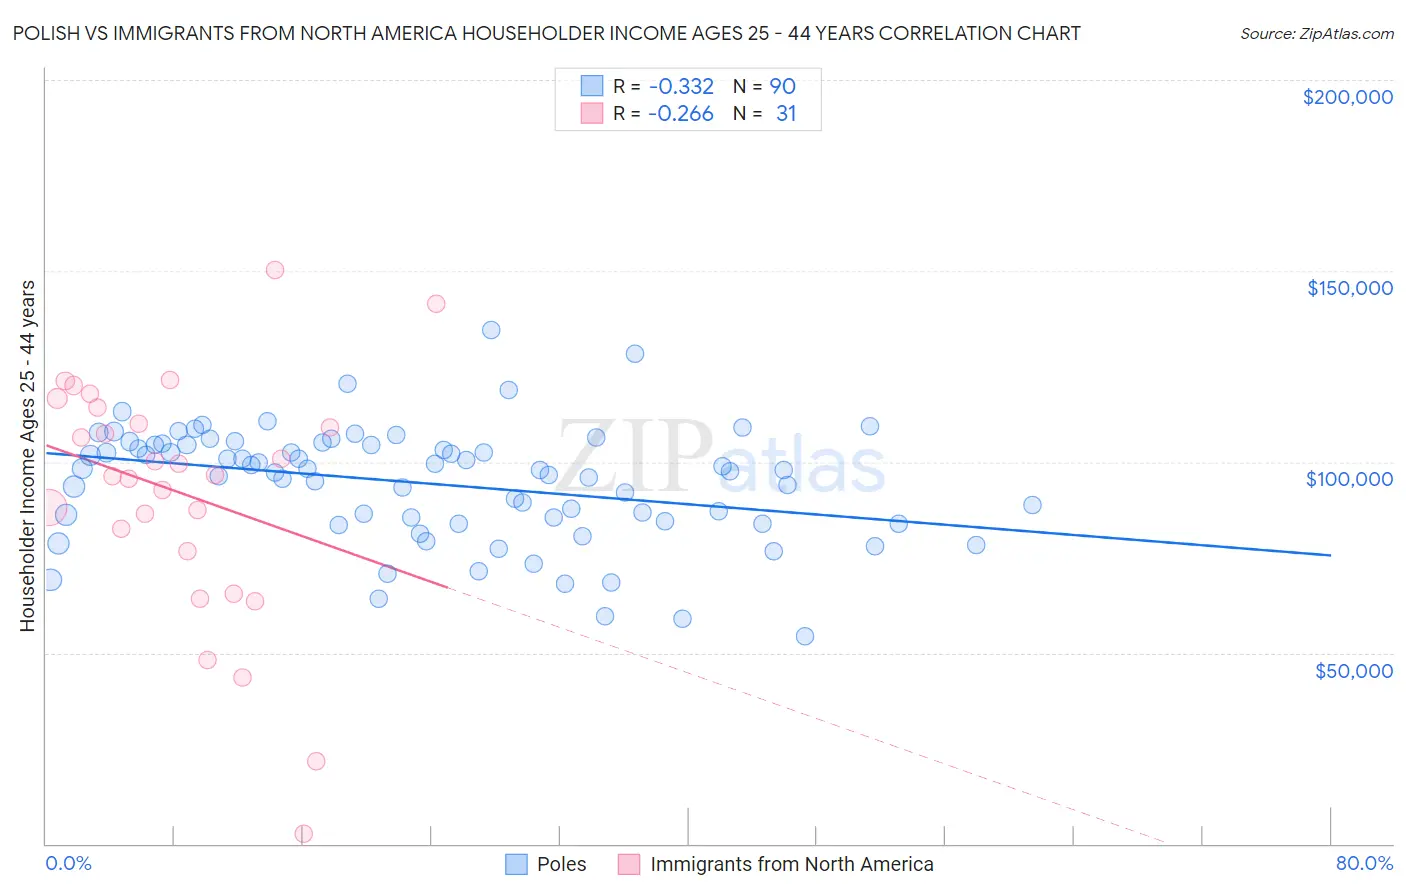 Polish vs Immigrants from North America Householder Income Ages 25 - 44 years